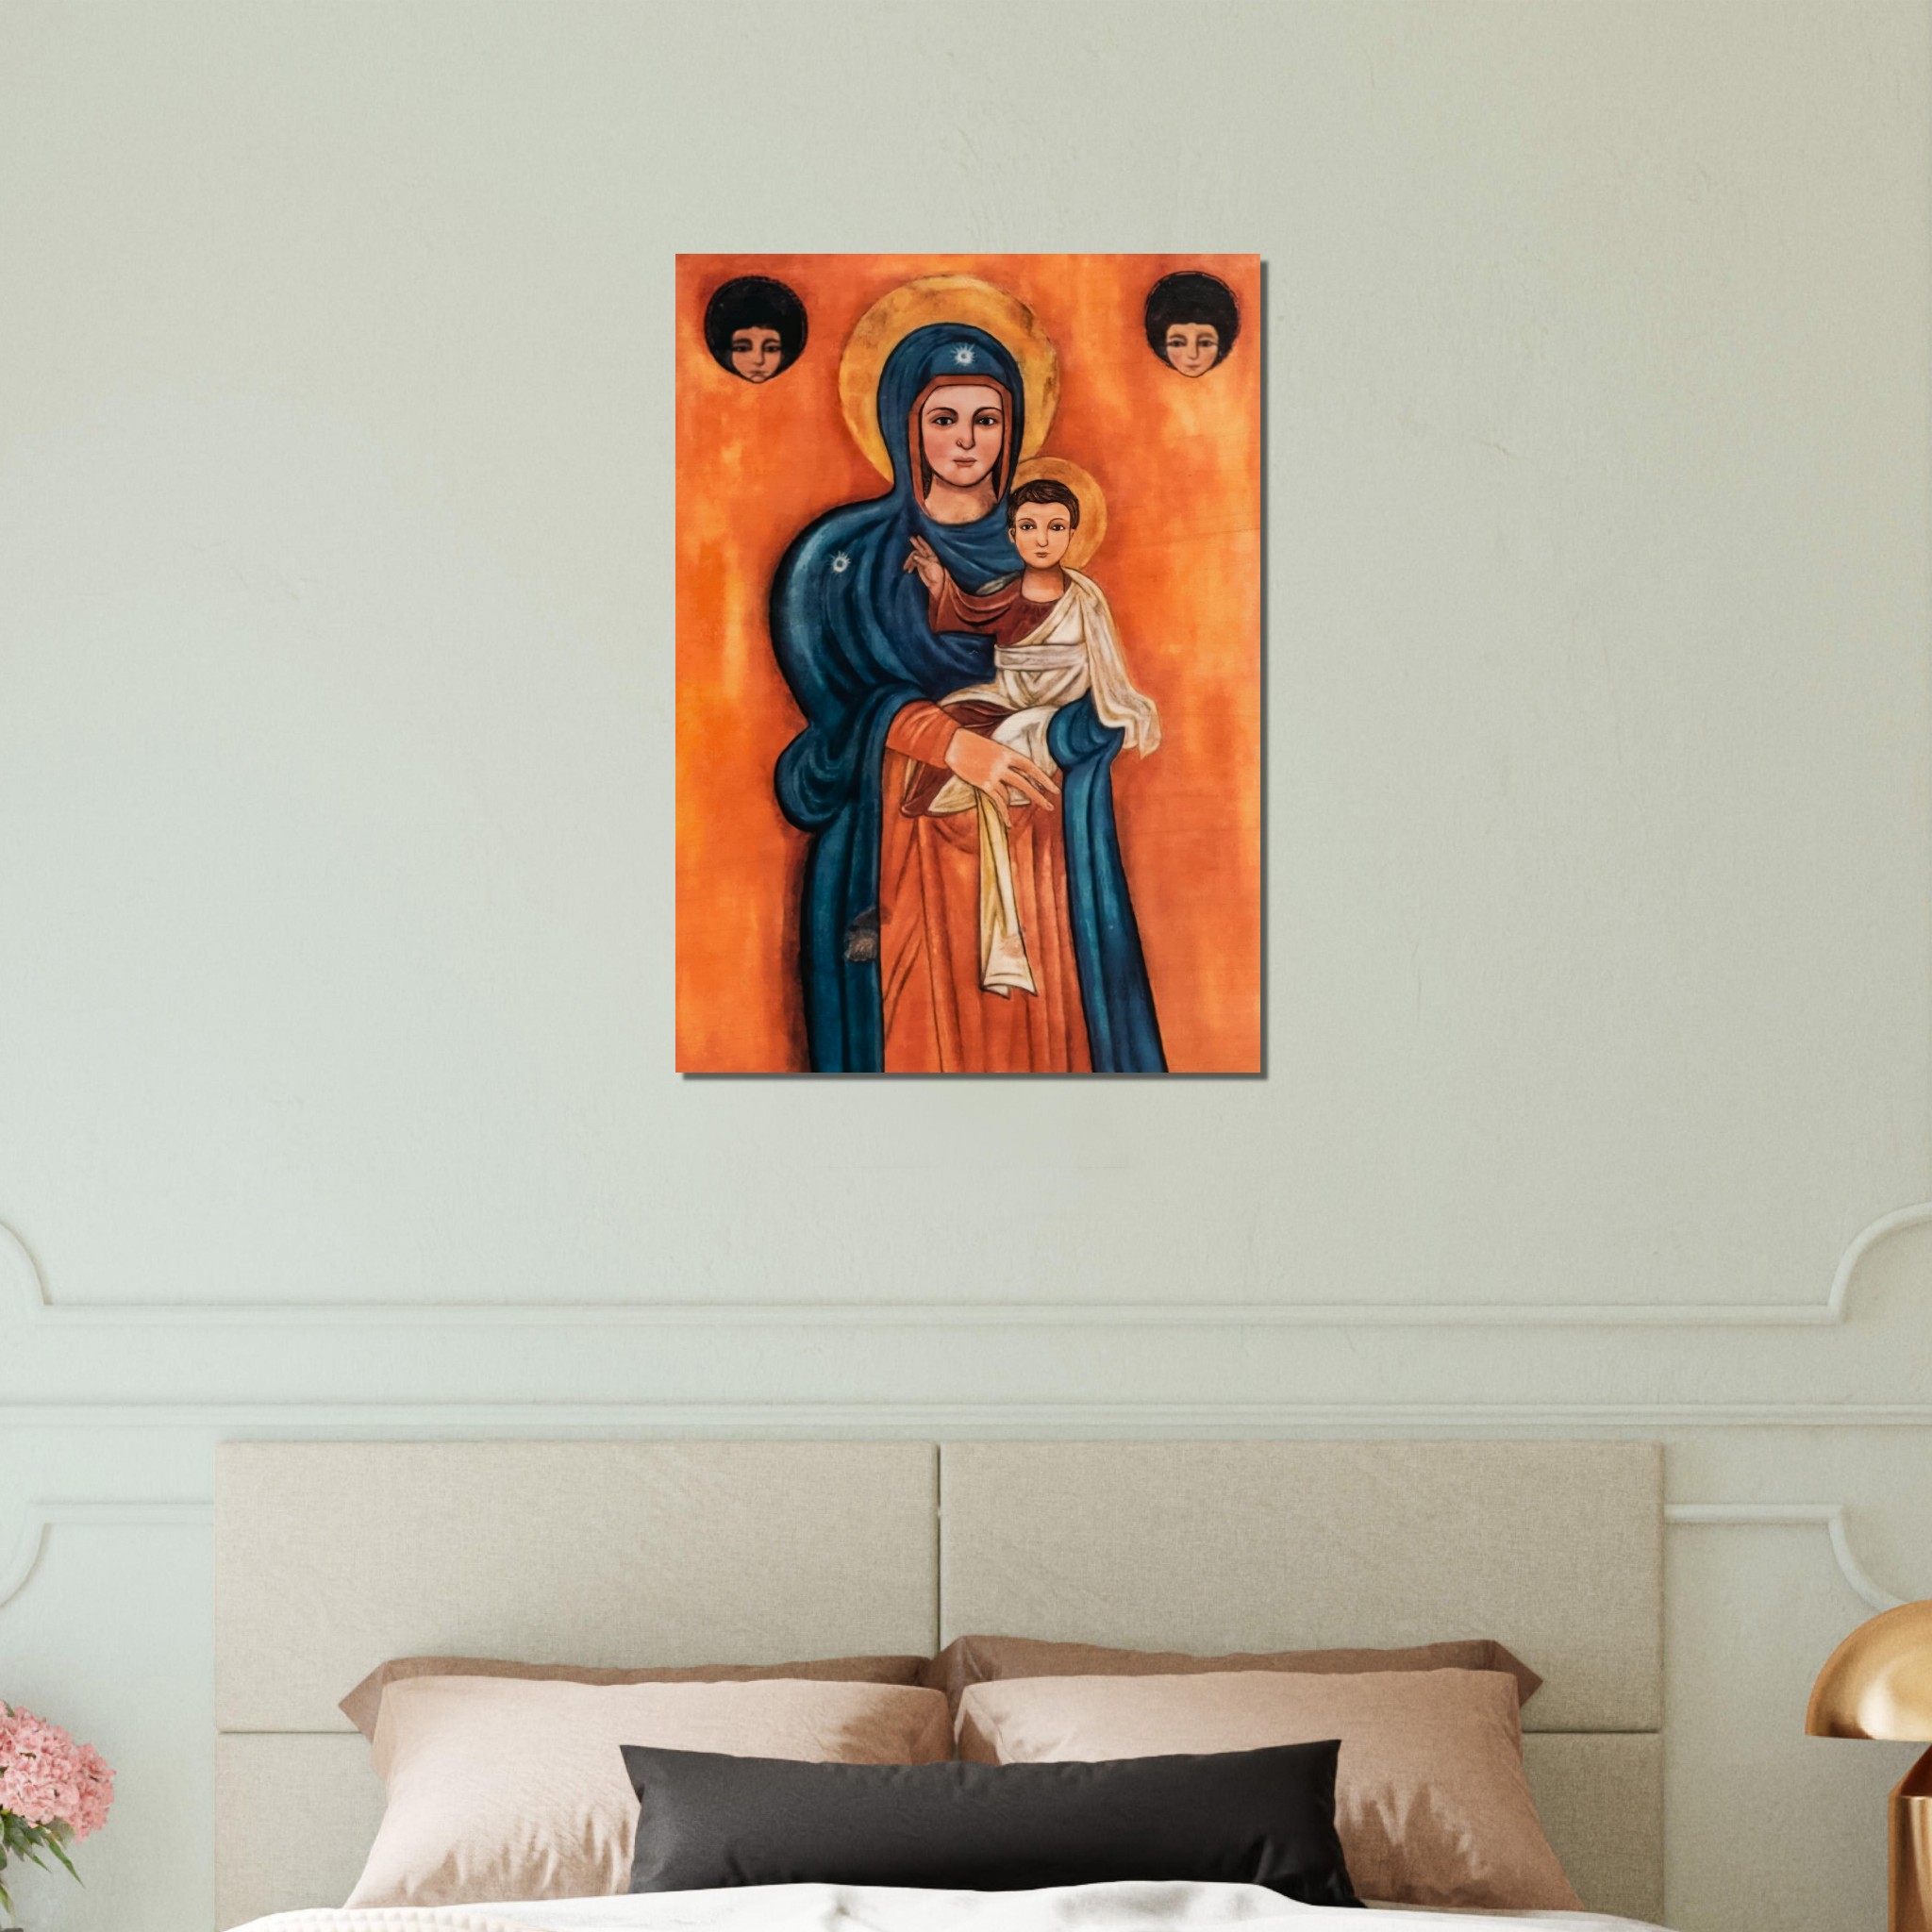 Our Lady of the Maronites, Elige Wood Icon